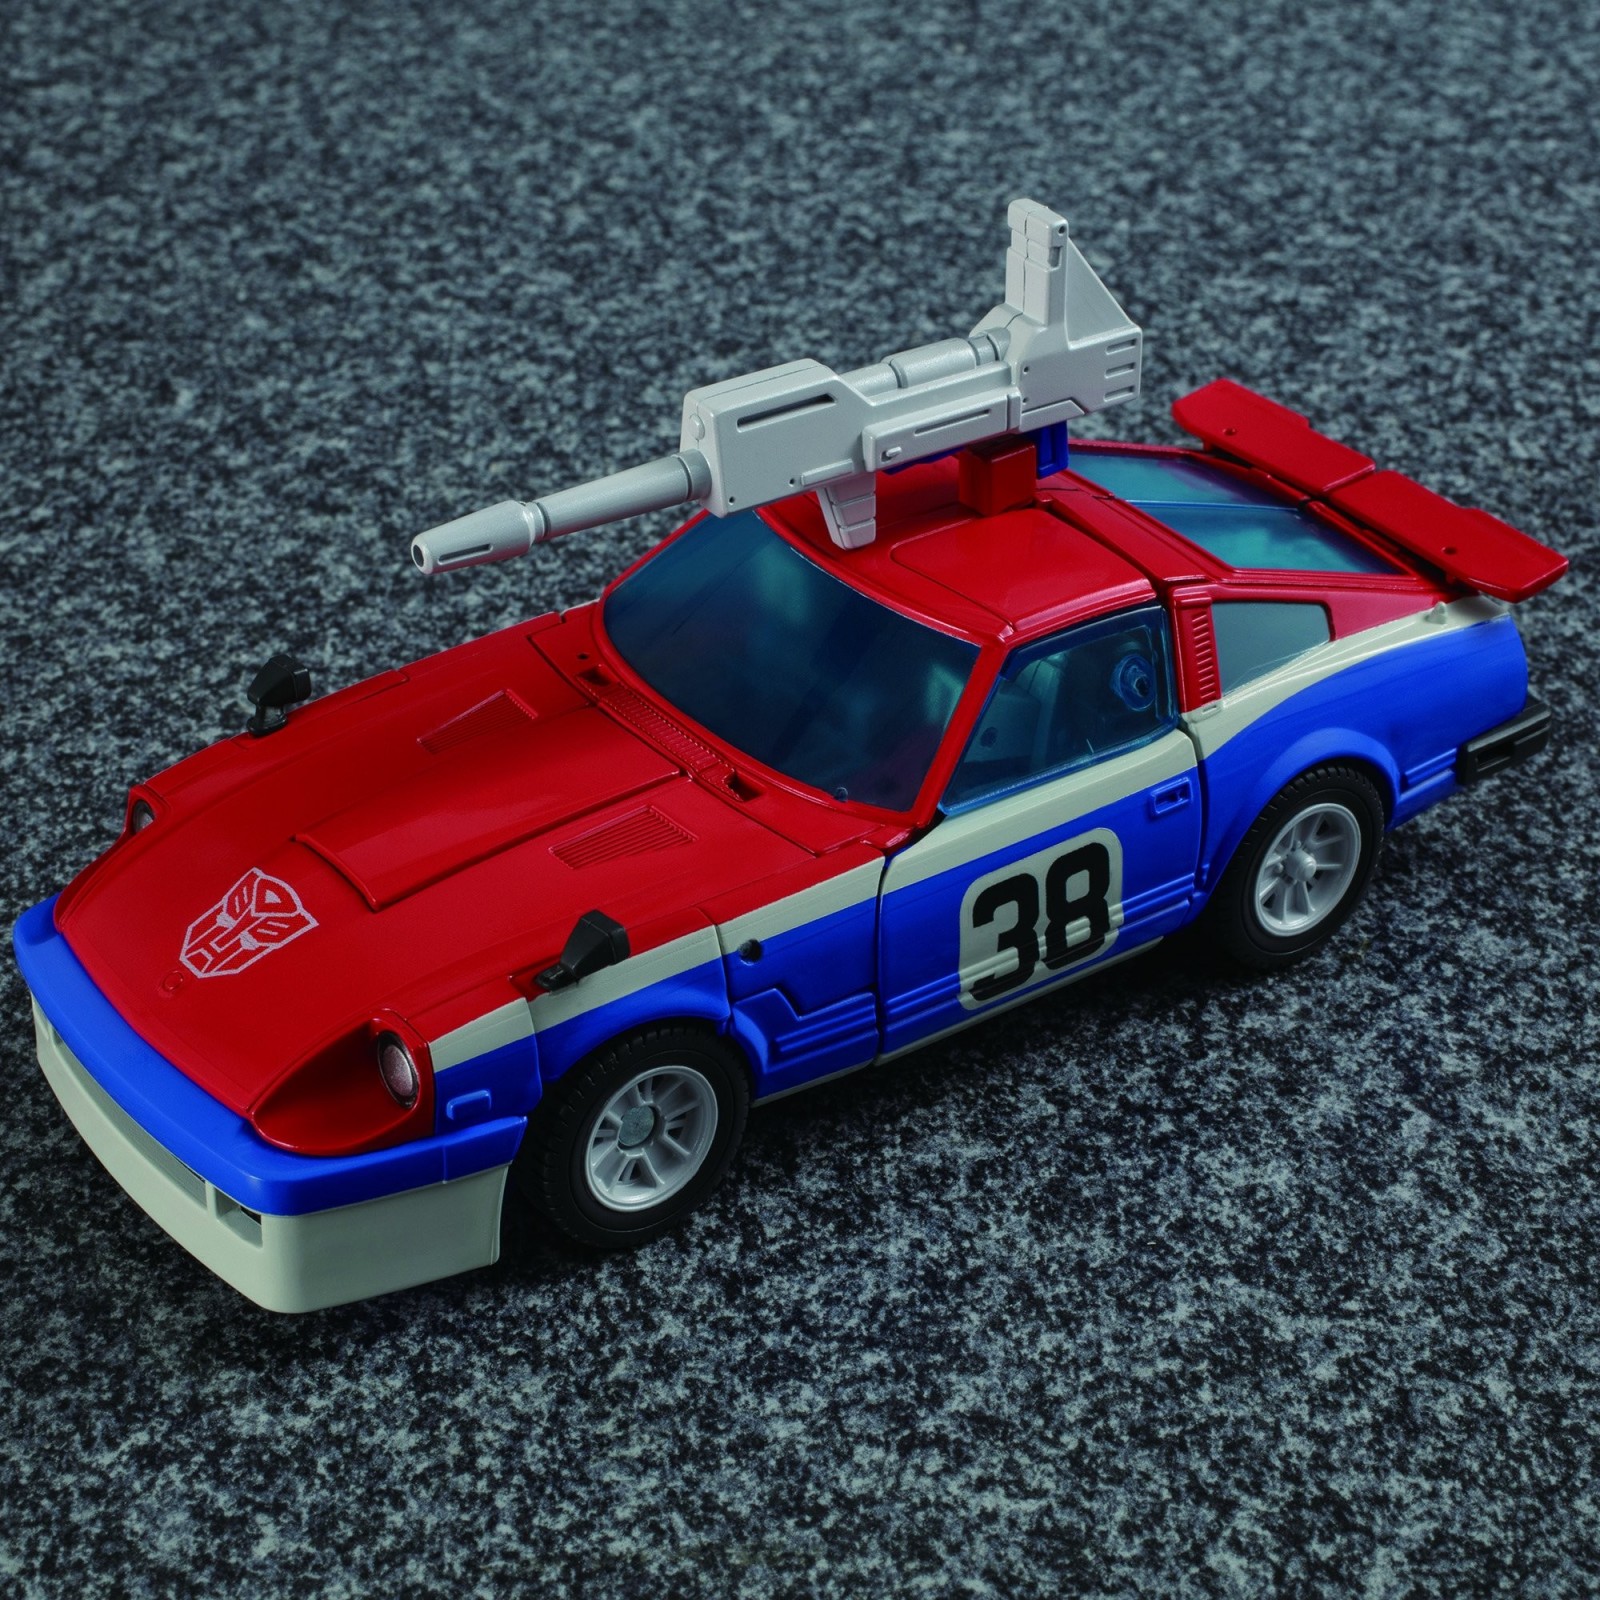 Transformers News: Bigger Higher Quality Images of Takara Tomy Transformers MP 19 Smokescreen